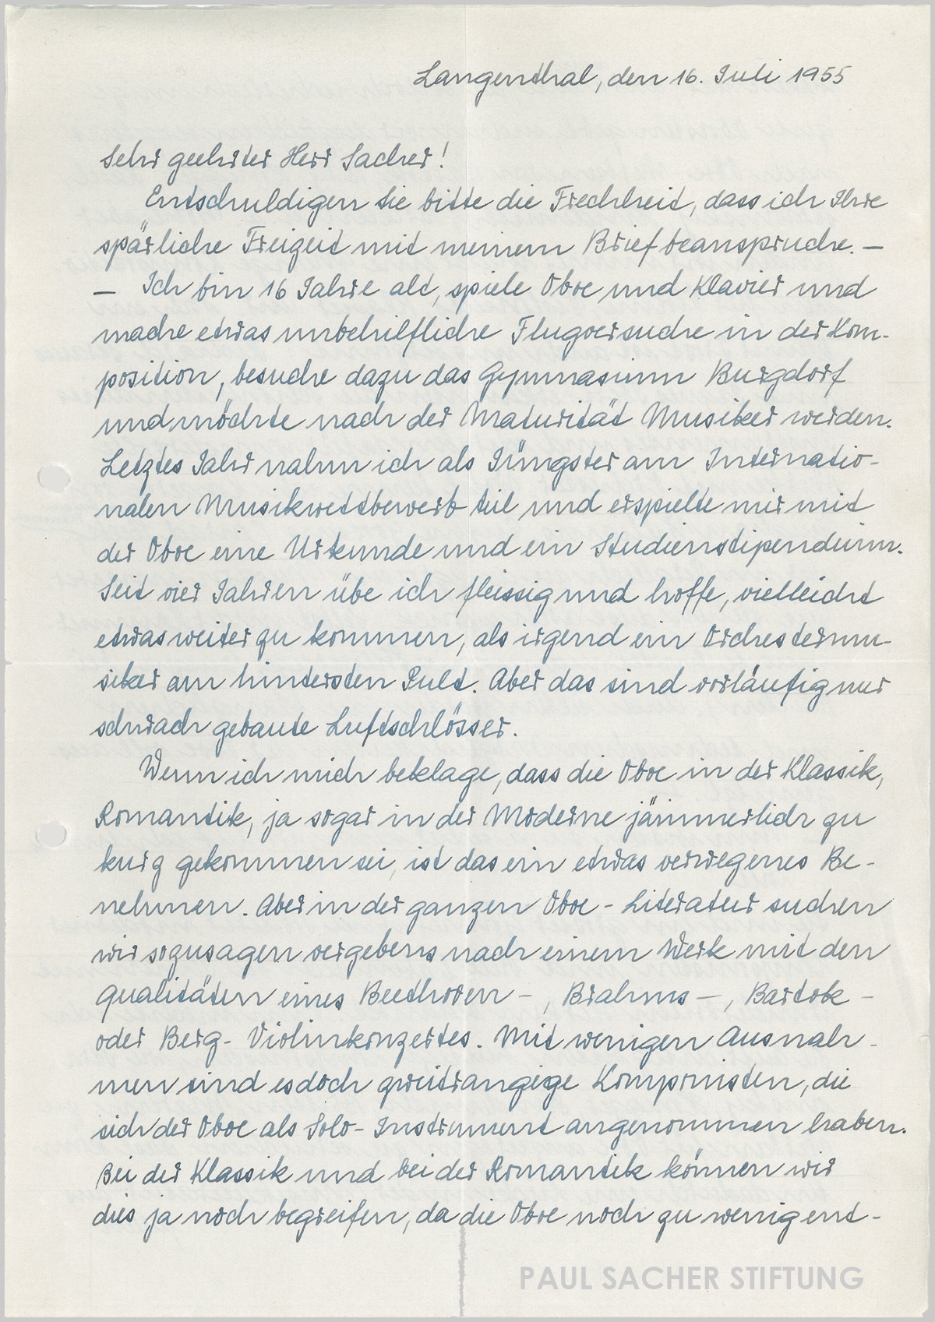 Heinz Holliger, letter to Paul Sacher, May 16, 1955, p. 1 (Paul Sacher Collection, PSS)